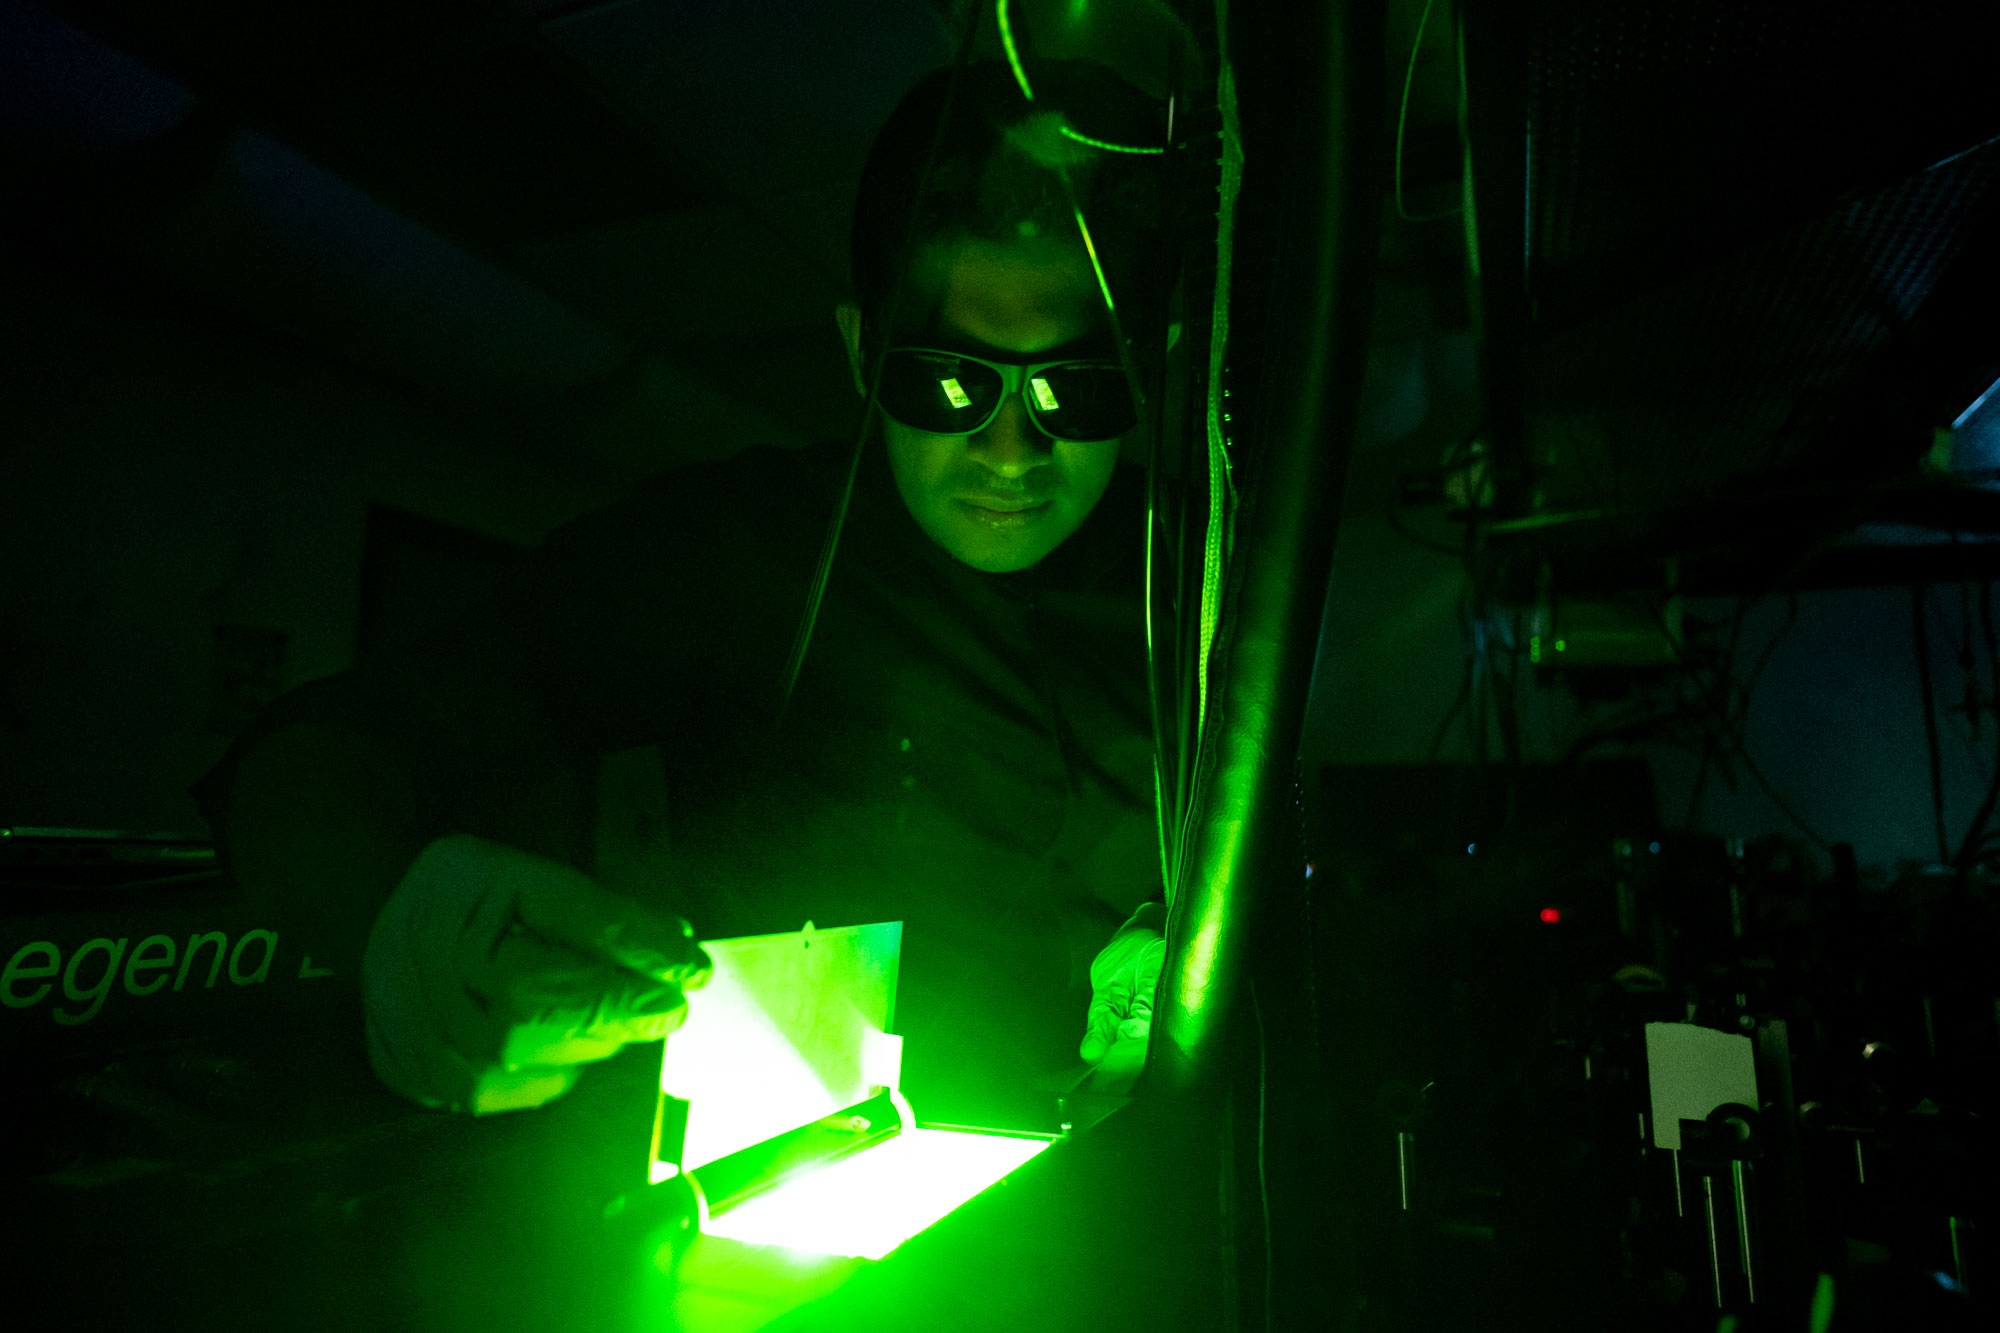 a graduate student wearing dark safety glasses looks into a container illuminated by a green laser